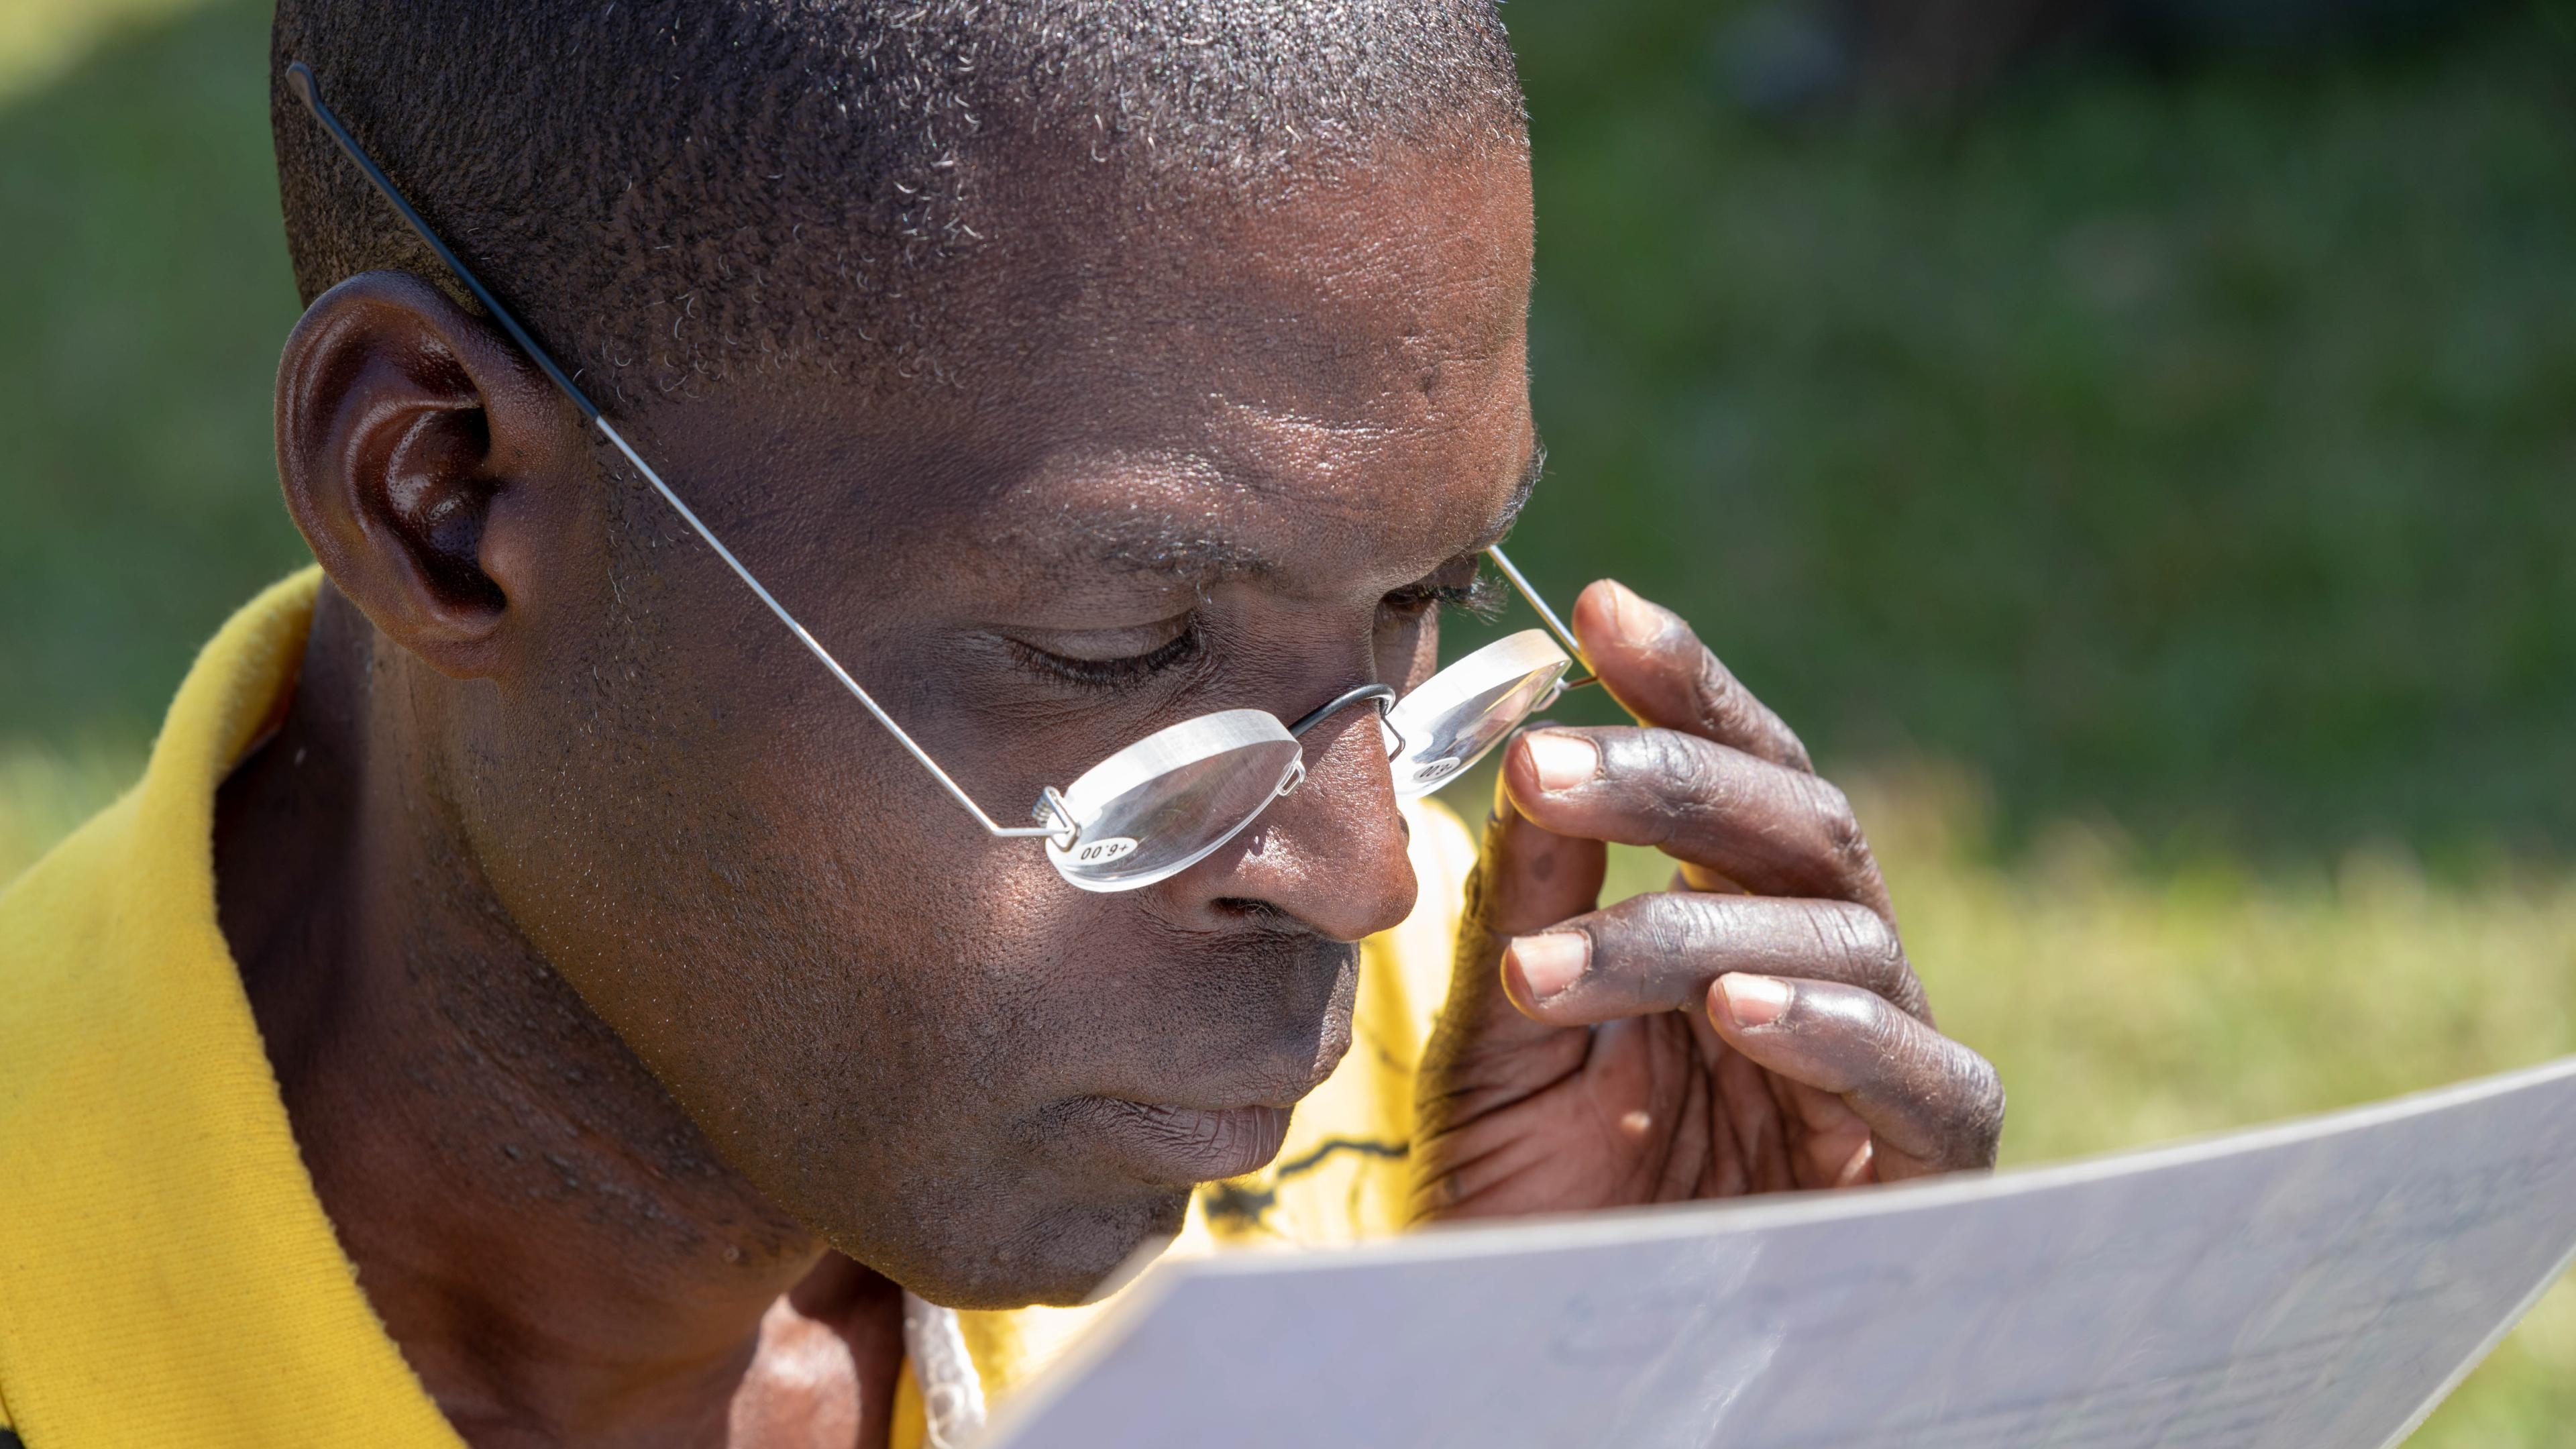 Man from Malawi reads with his new OneDollarGlasses